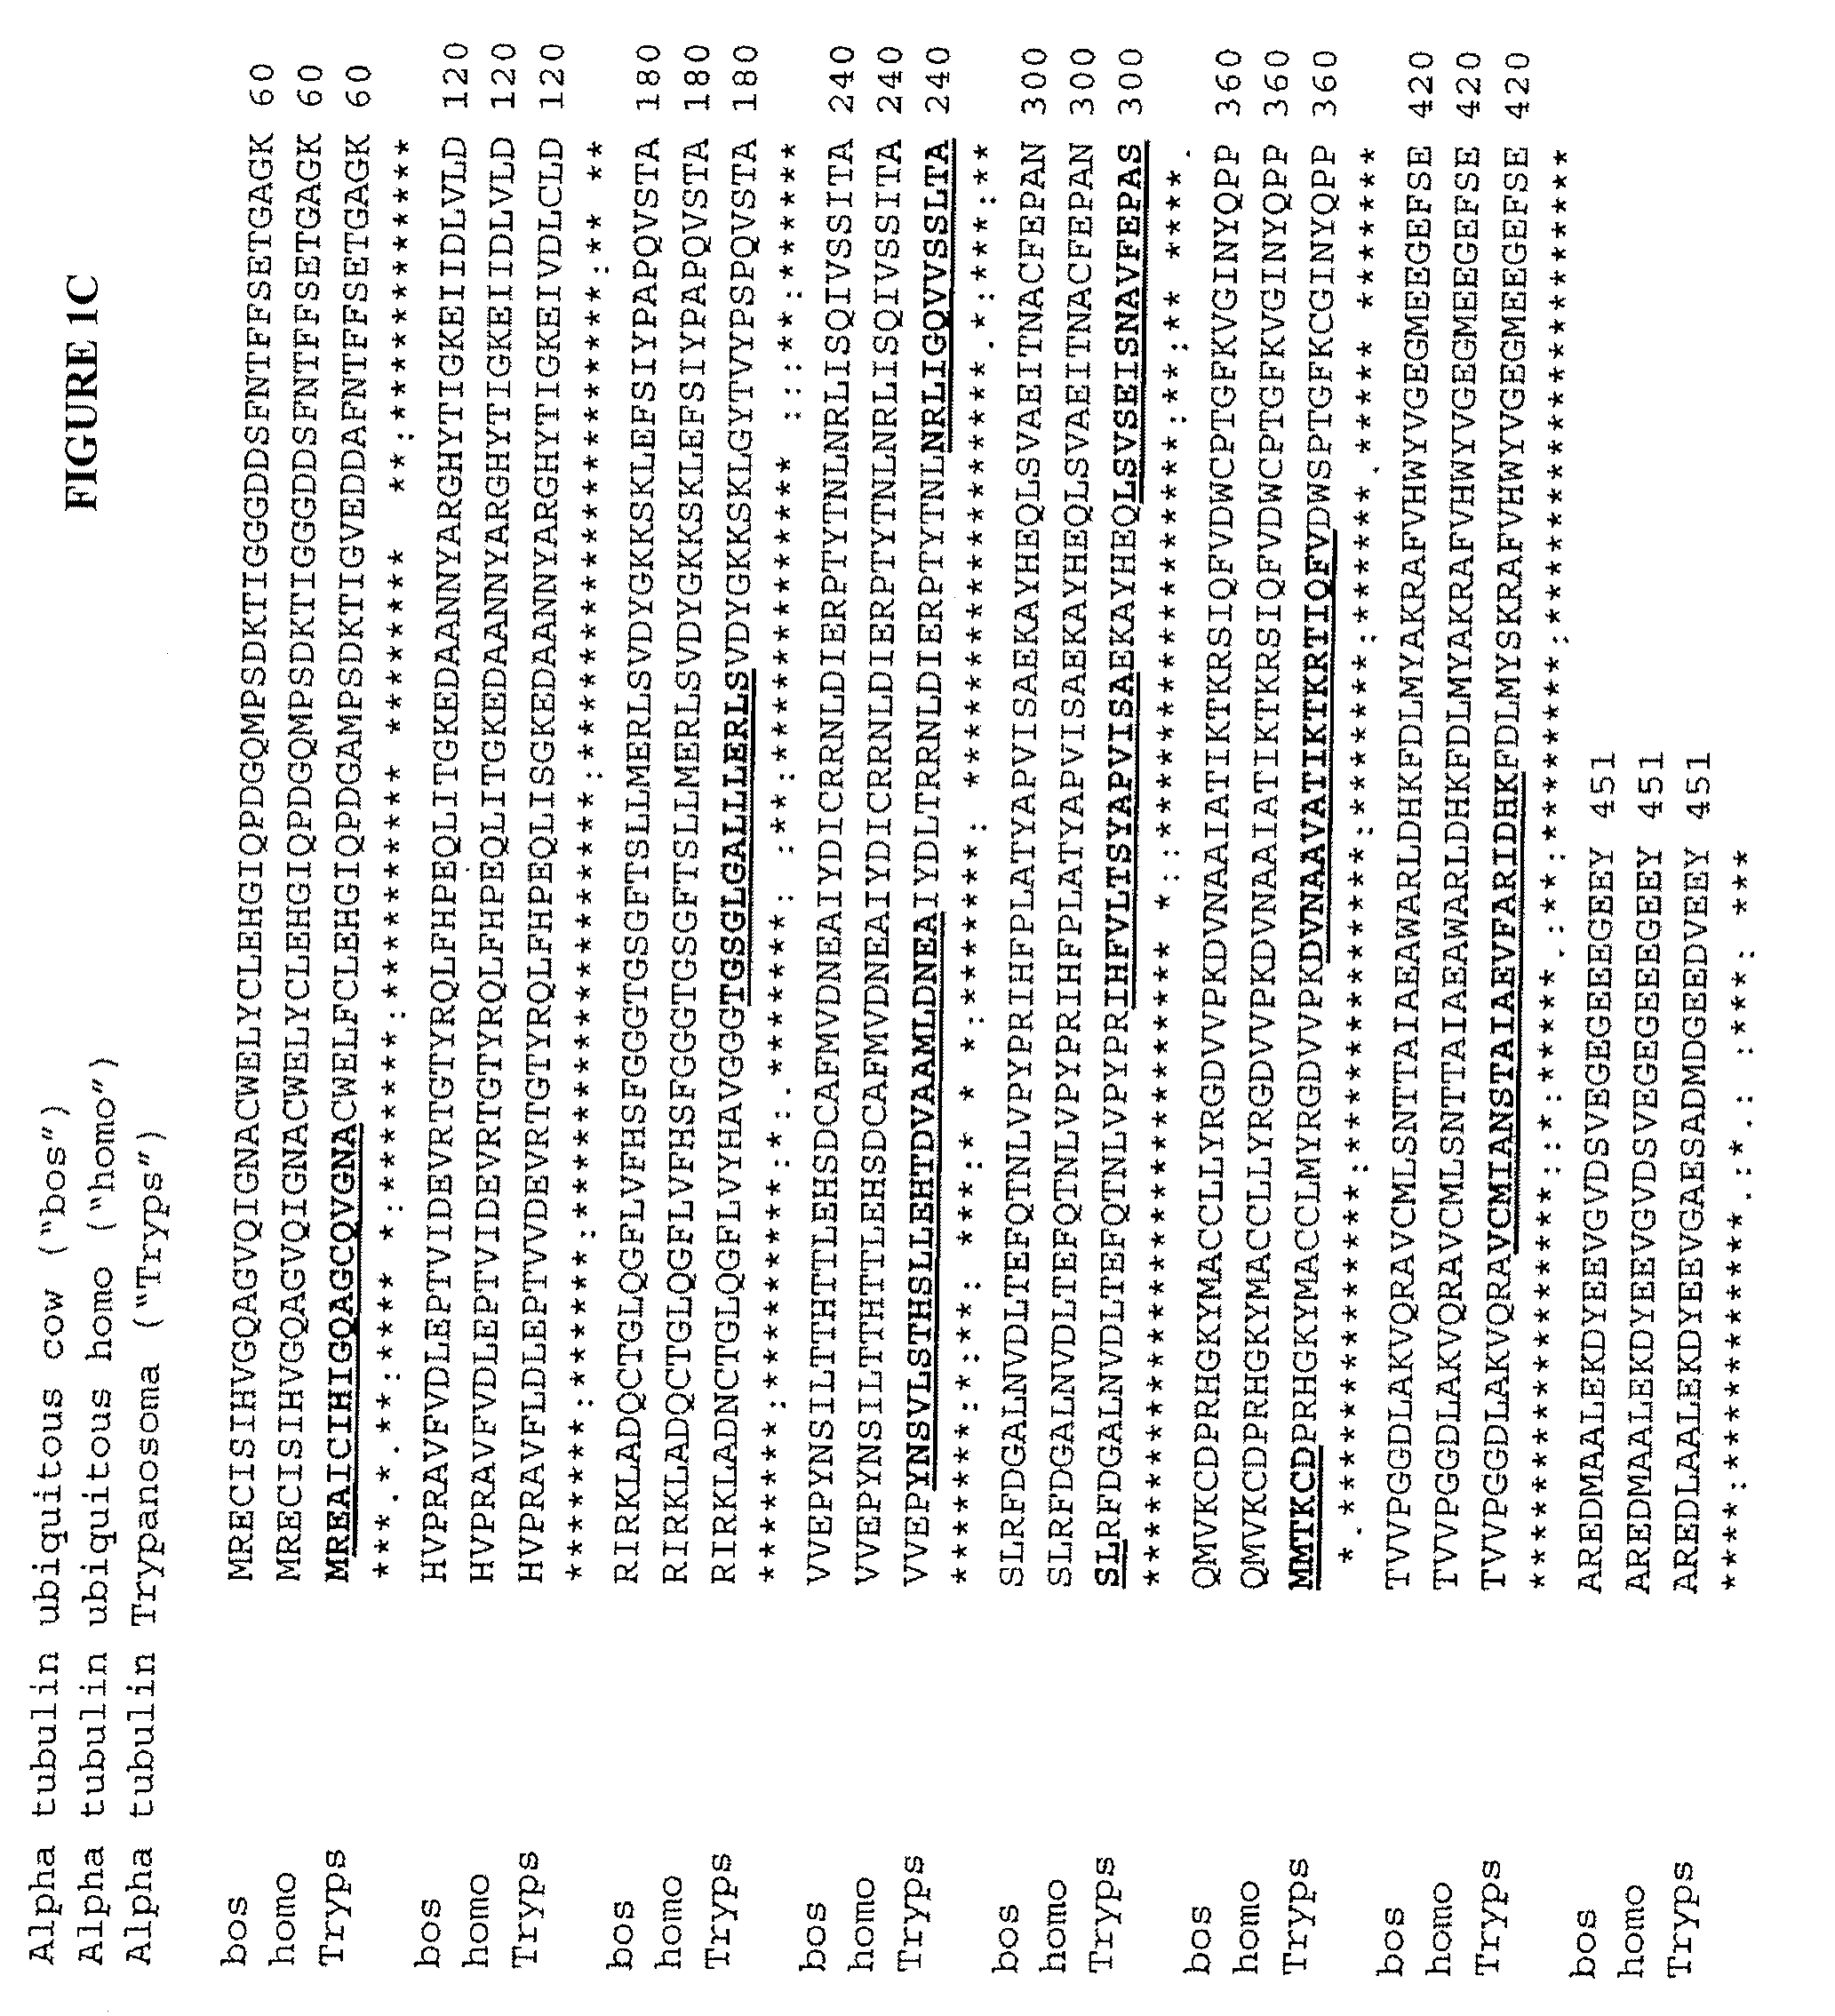 <i>Trypanosoma </i>antigens, vaccine compositions, and related methods